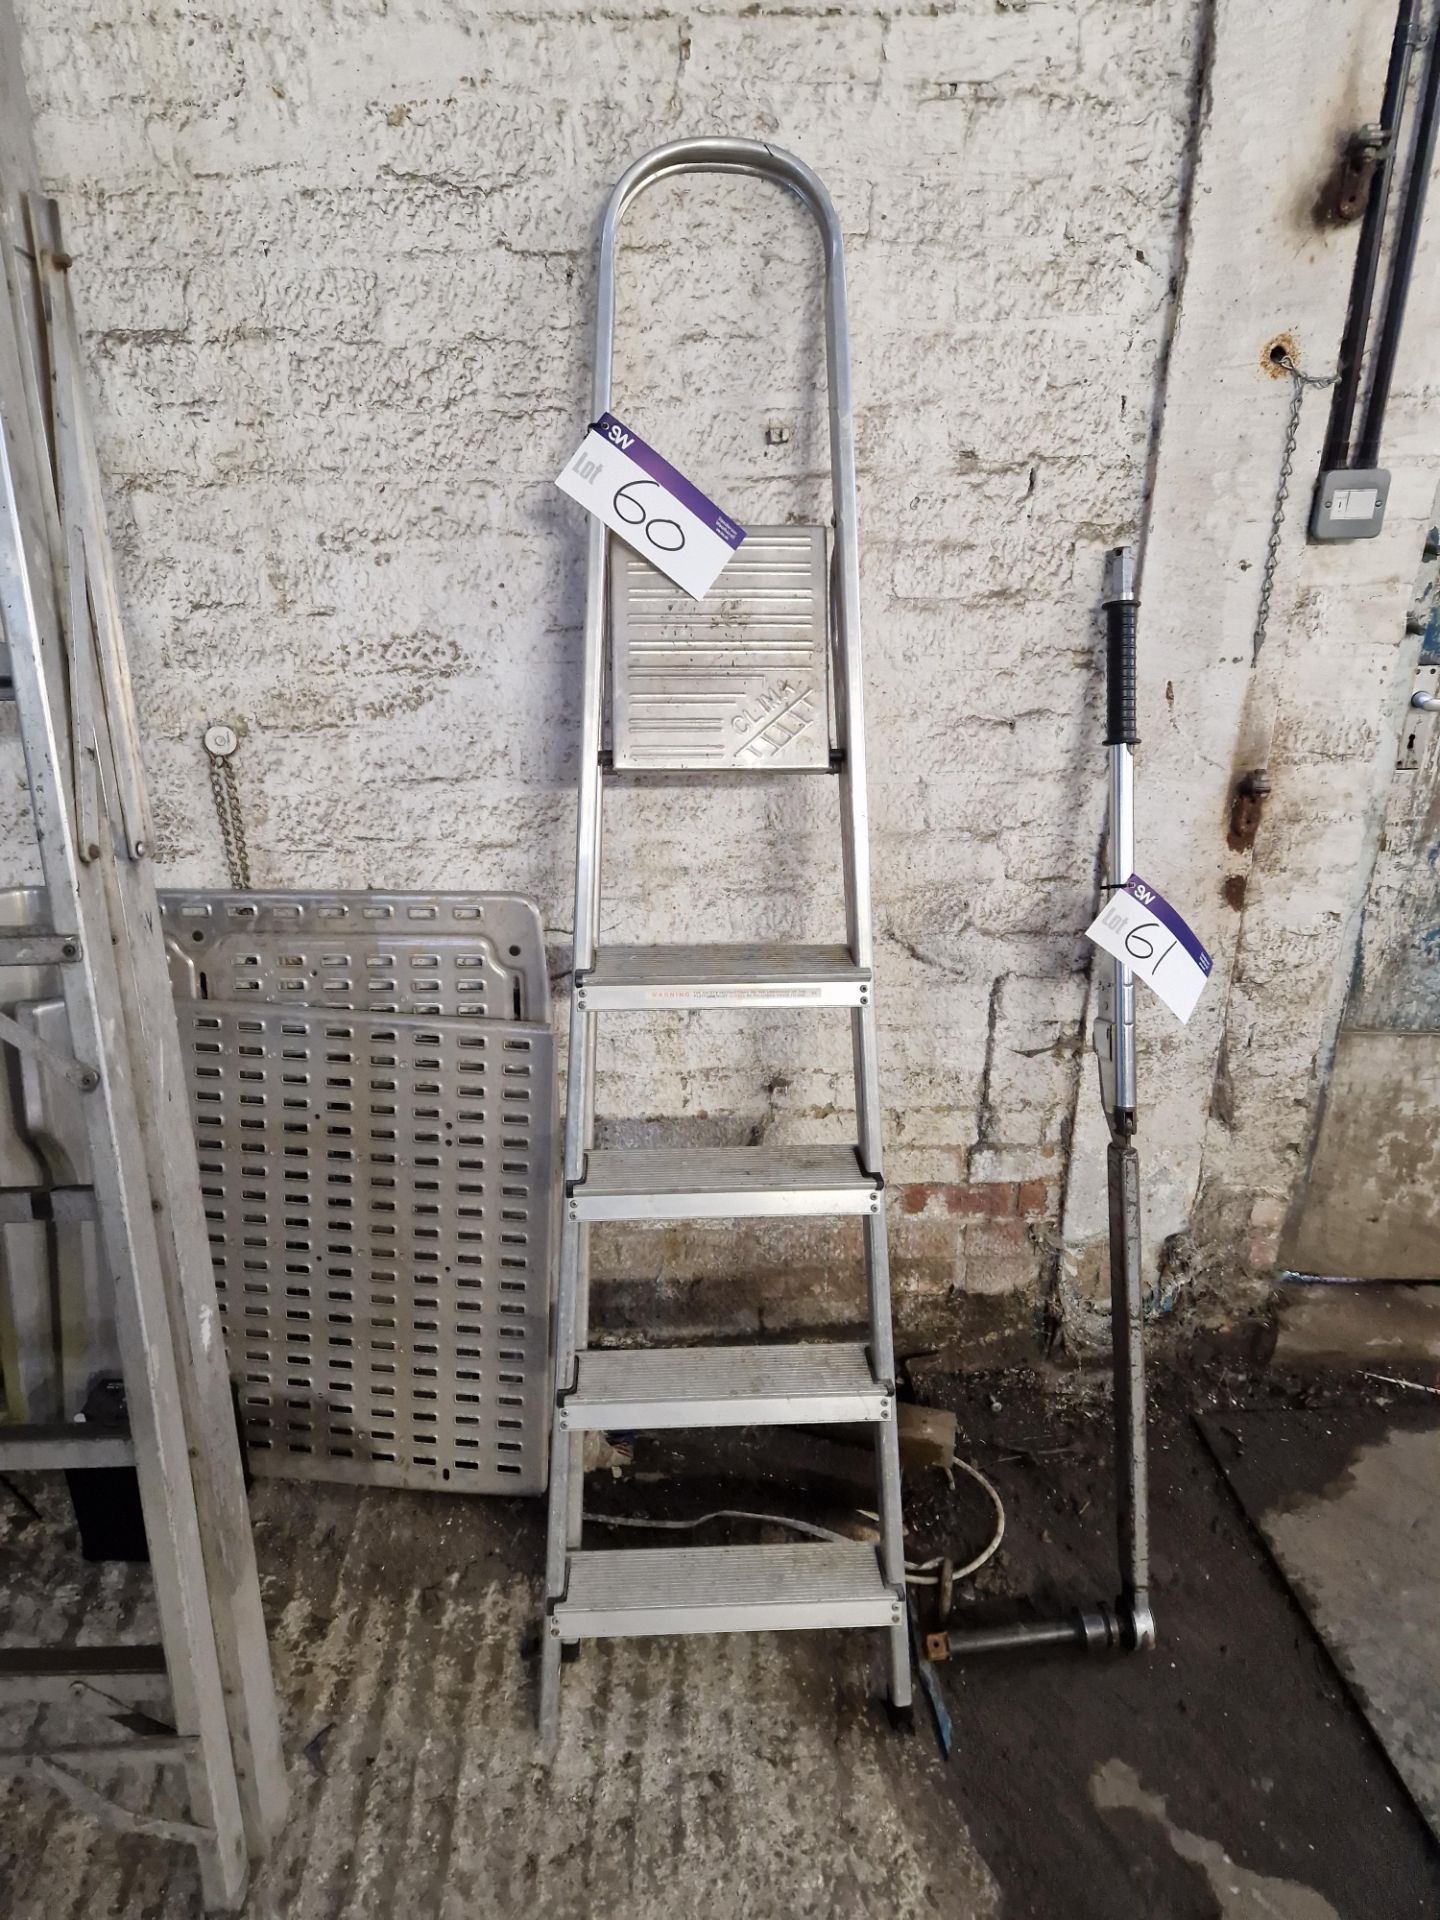 Five Rise Aluminium Step Ladder Please read the following important notes:- ***Overseas buyers - All